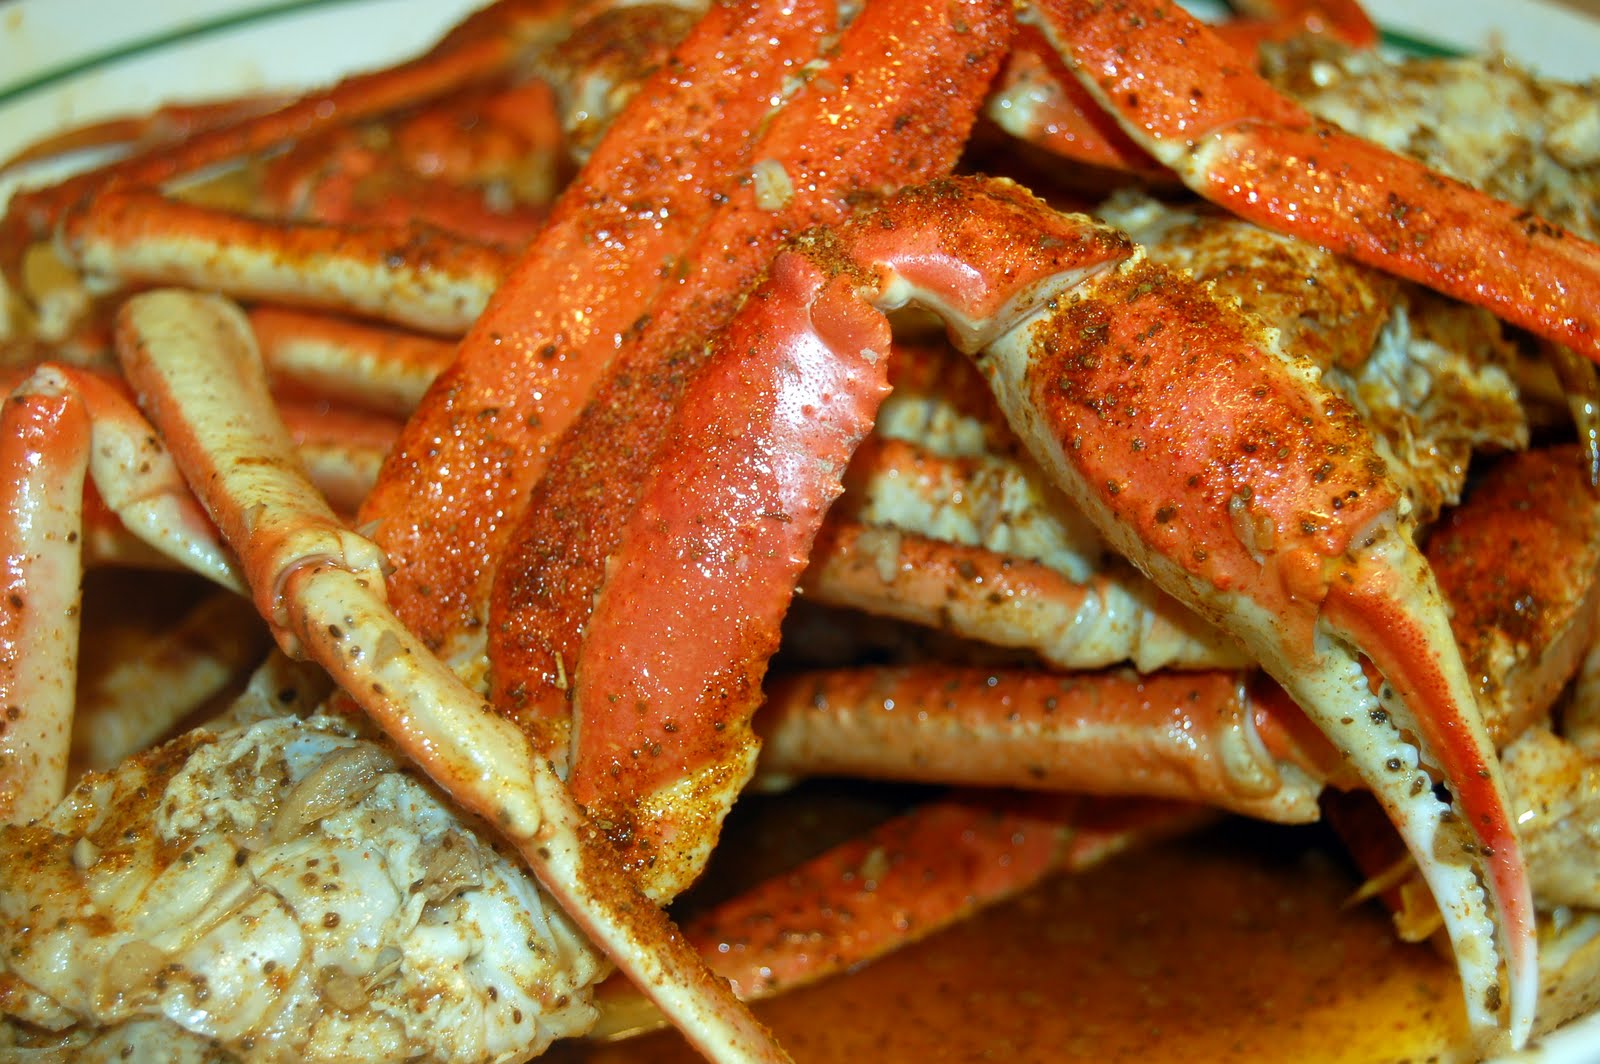 Snow Crab Legs in Garlic Butter Beer Sauce - Souffle Bombay